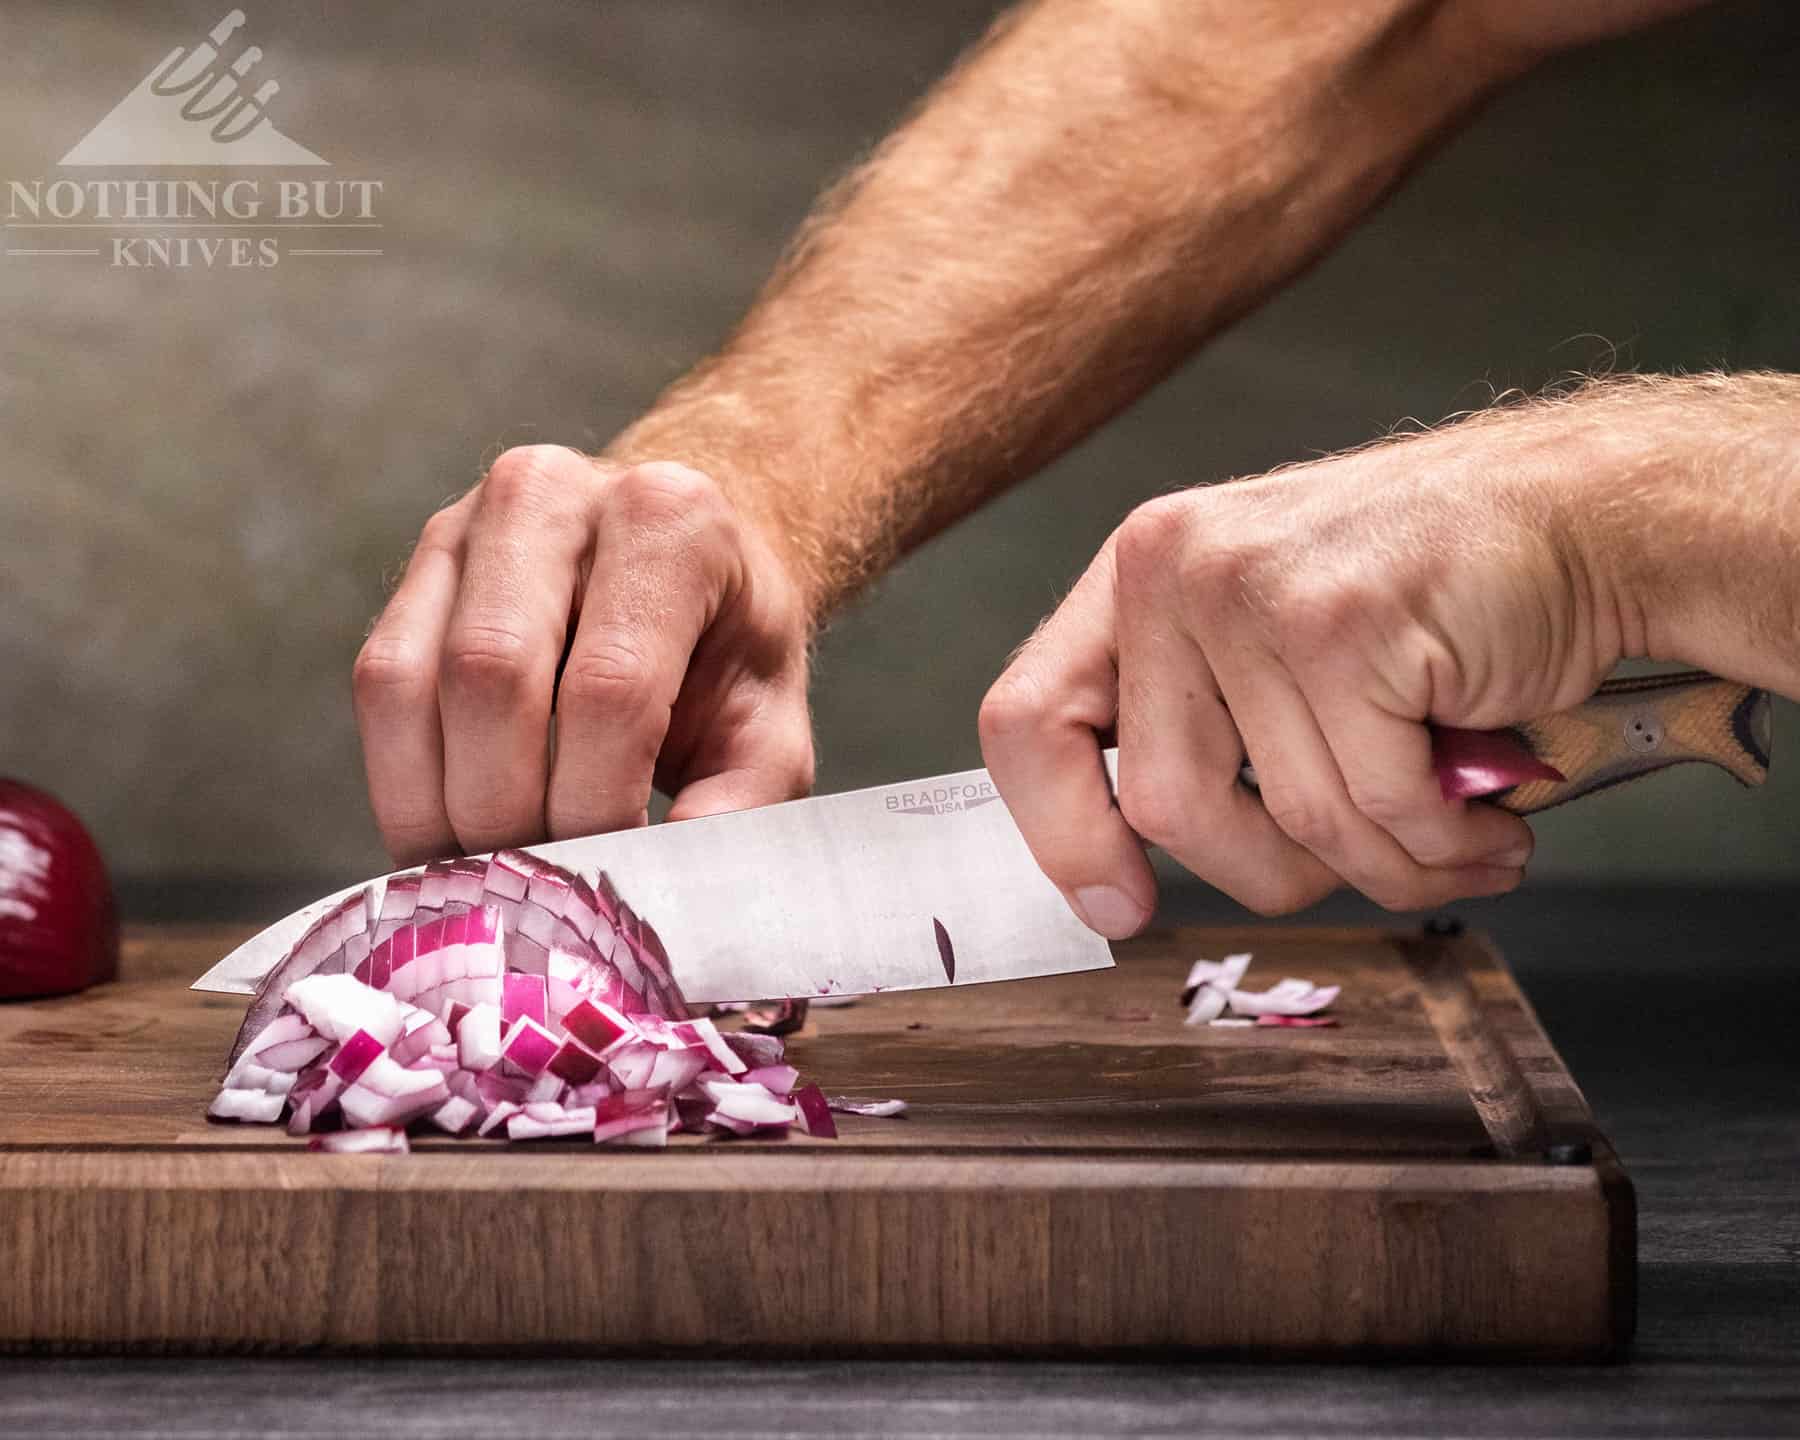 The Bradford chef knife does a good job with dicing onions.